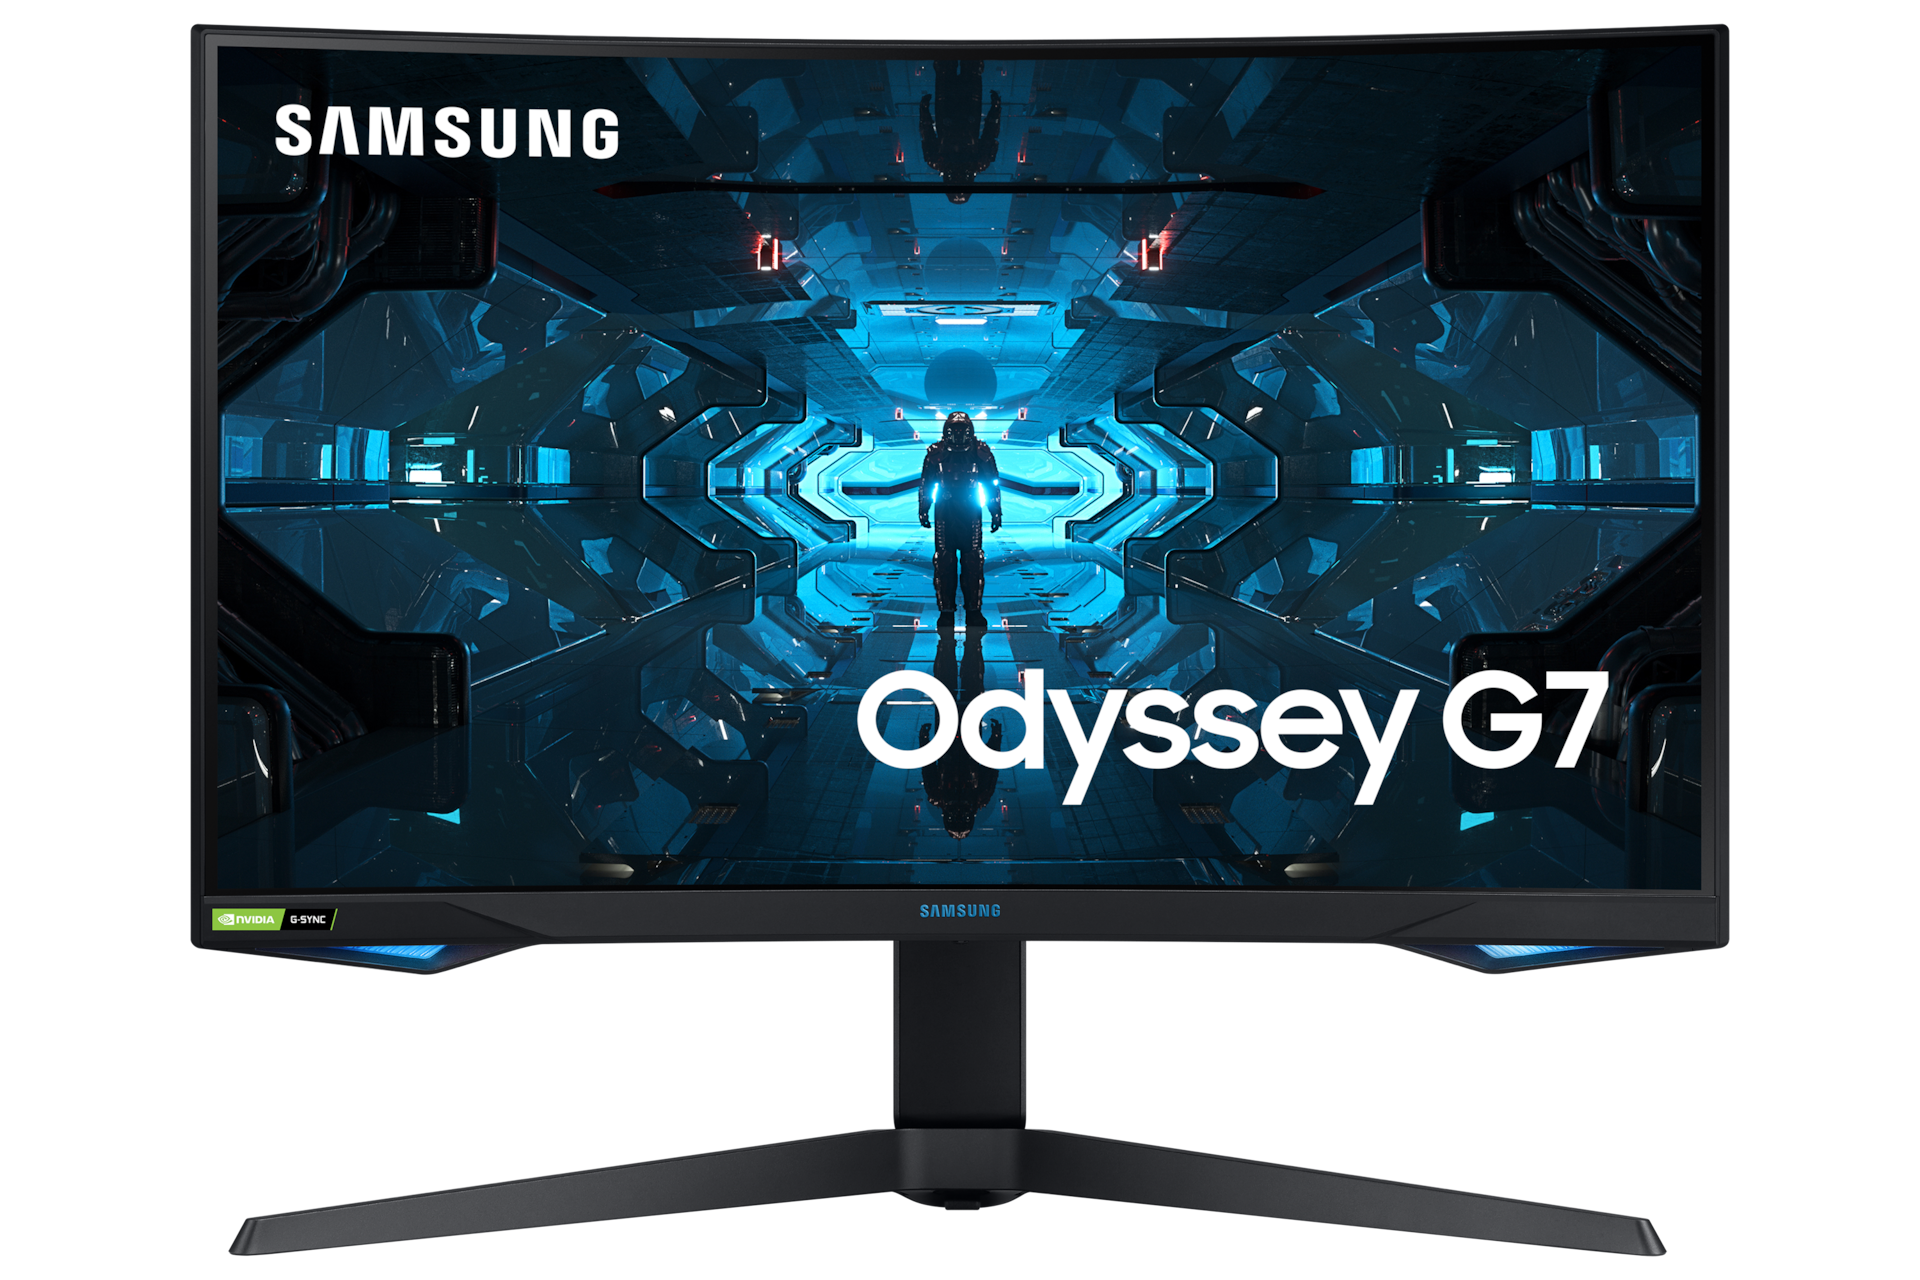 https://images.samsung.com/is/image/samsung/fr-odyssey-g7-c32g75t-lc27g75tqsuxen-frontblack-257545594?$PD_GALLERY_ZOOMIN_JPG$